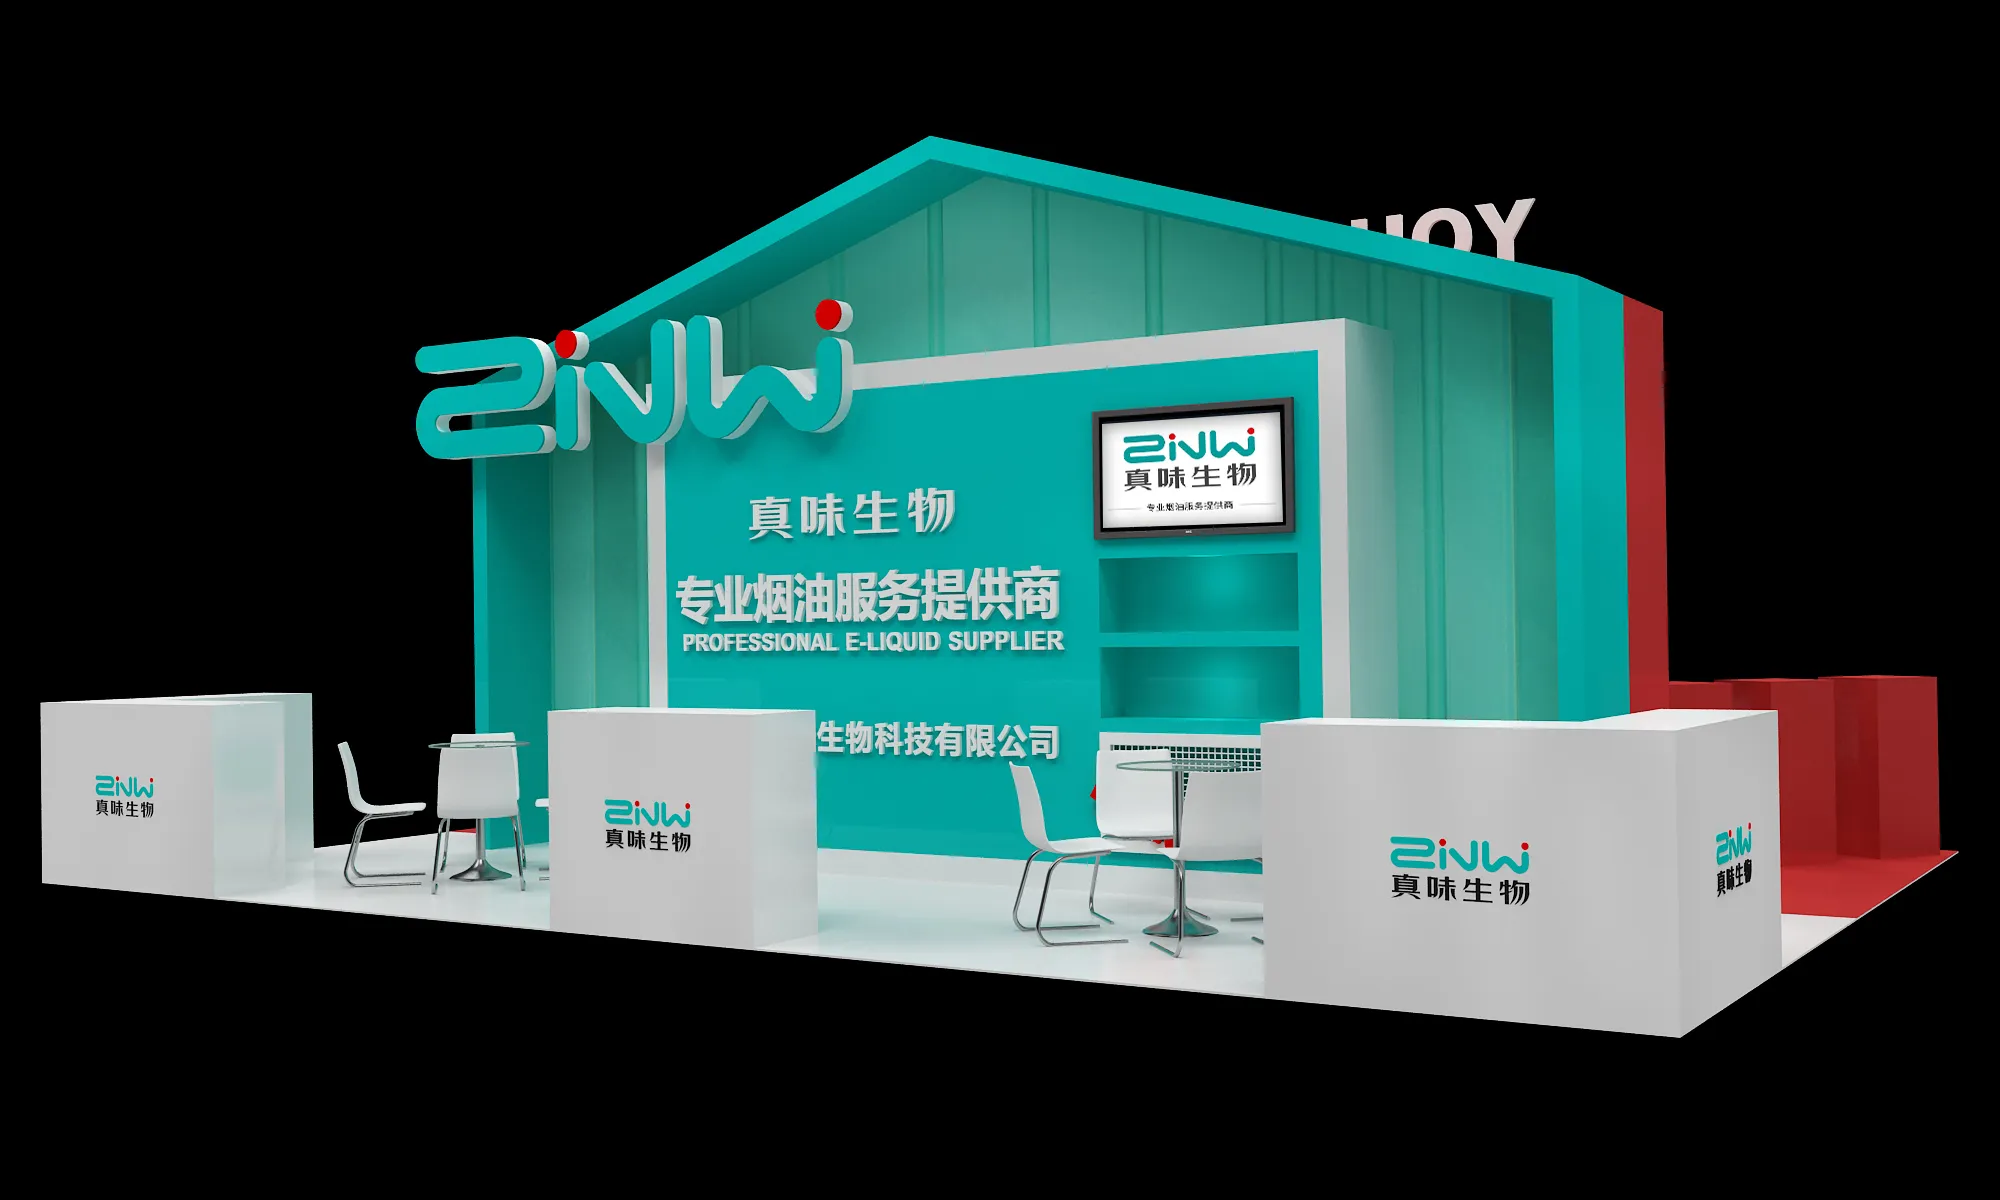 Zinwi Biotech Exhibition Highlights: Live 3D visual design of the booth